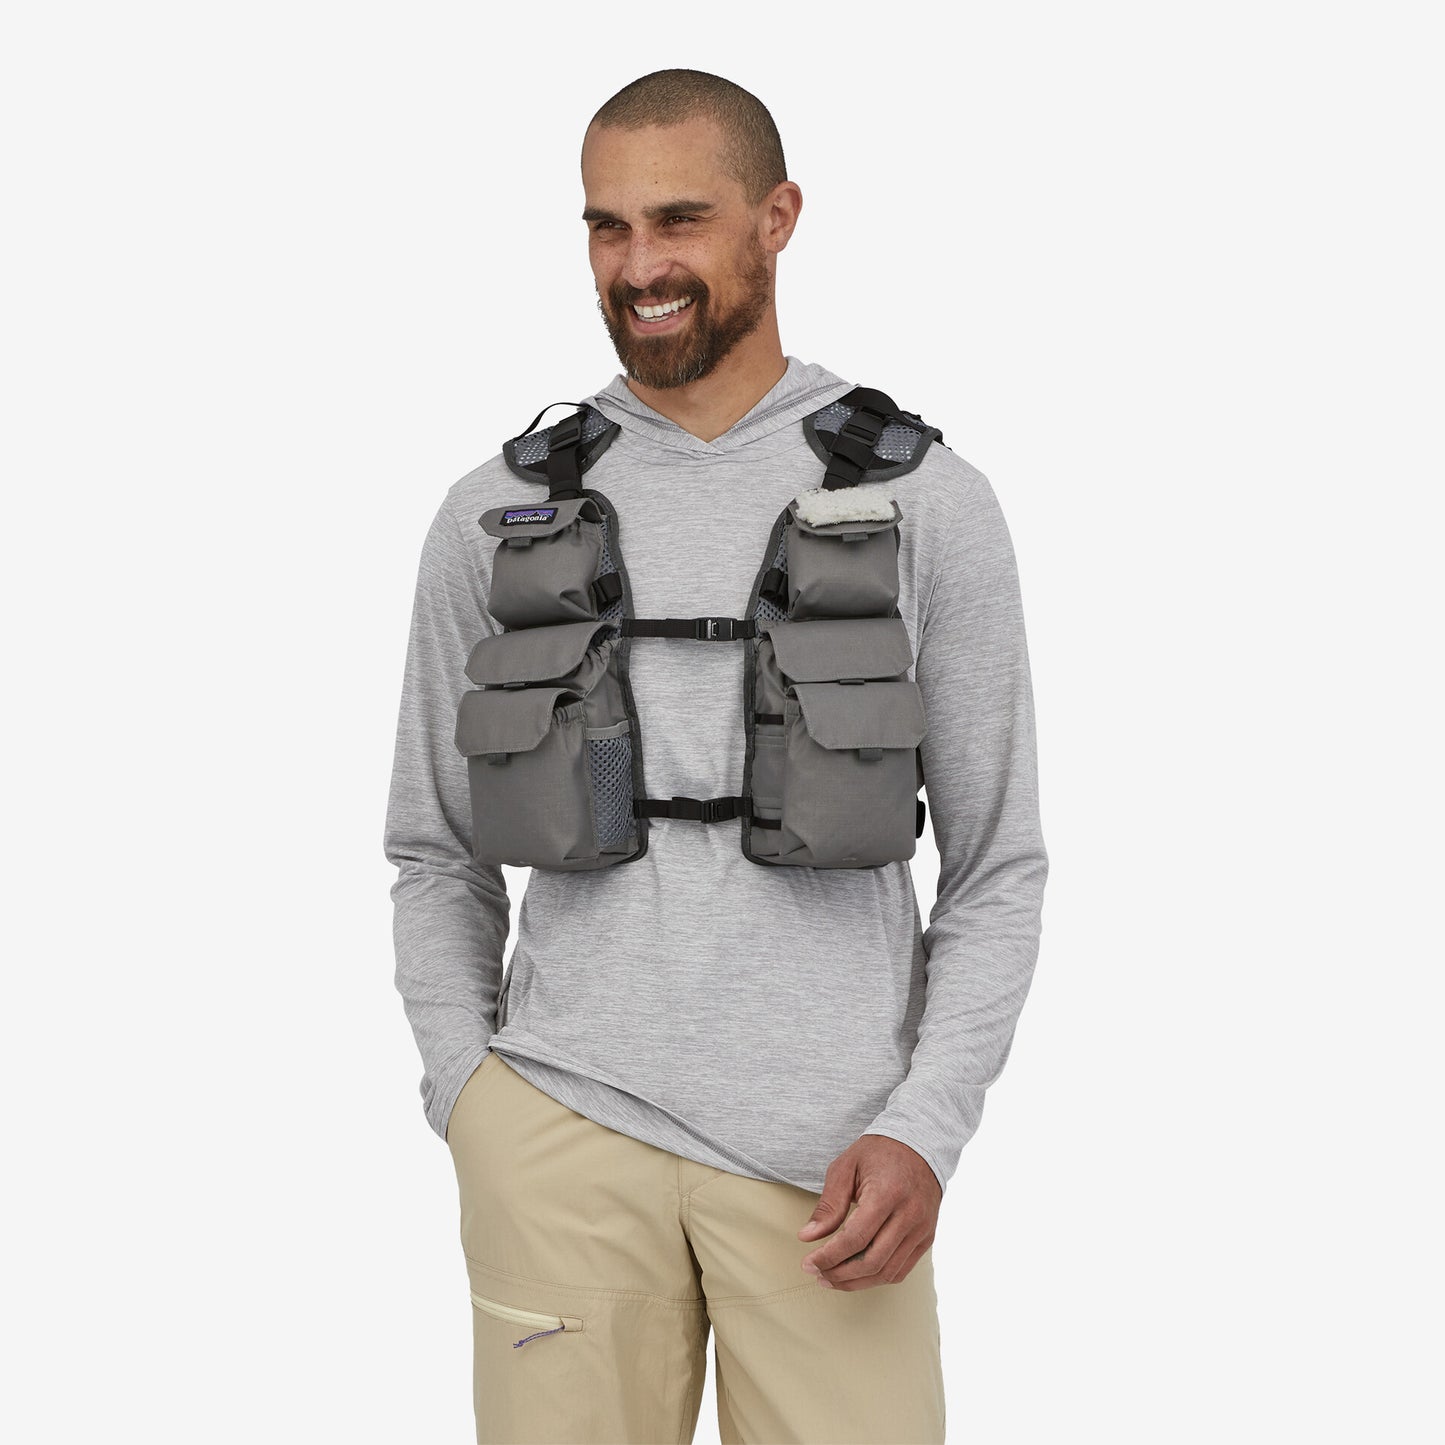 patagonia(パタゴニア) Stealth Convertible Vest 81917